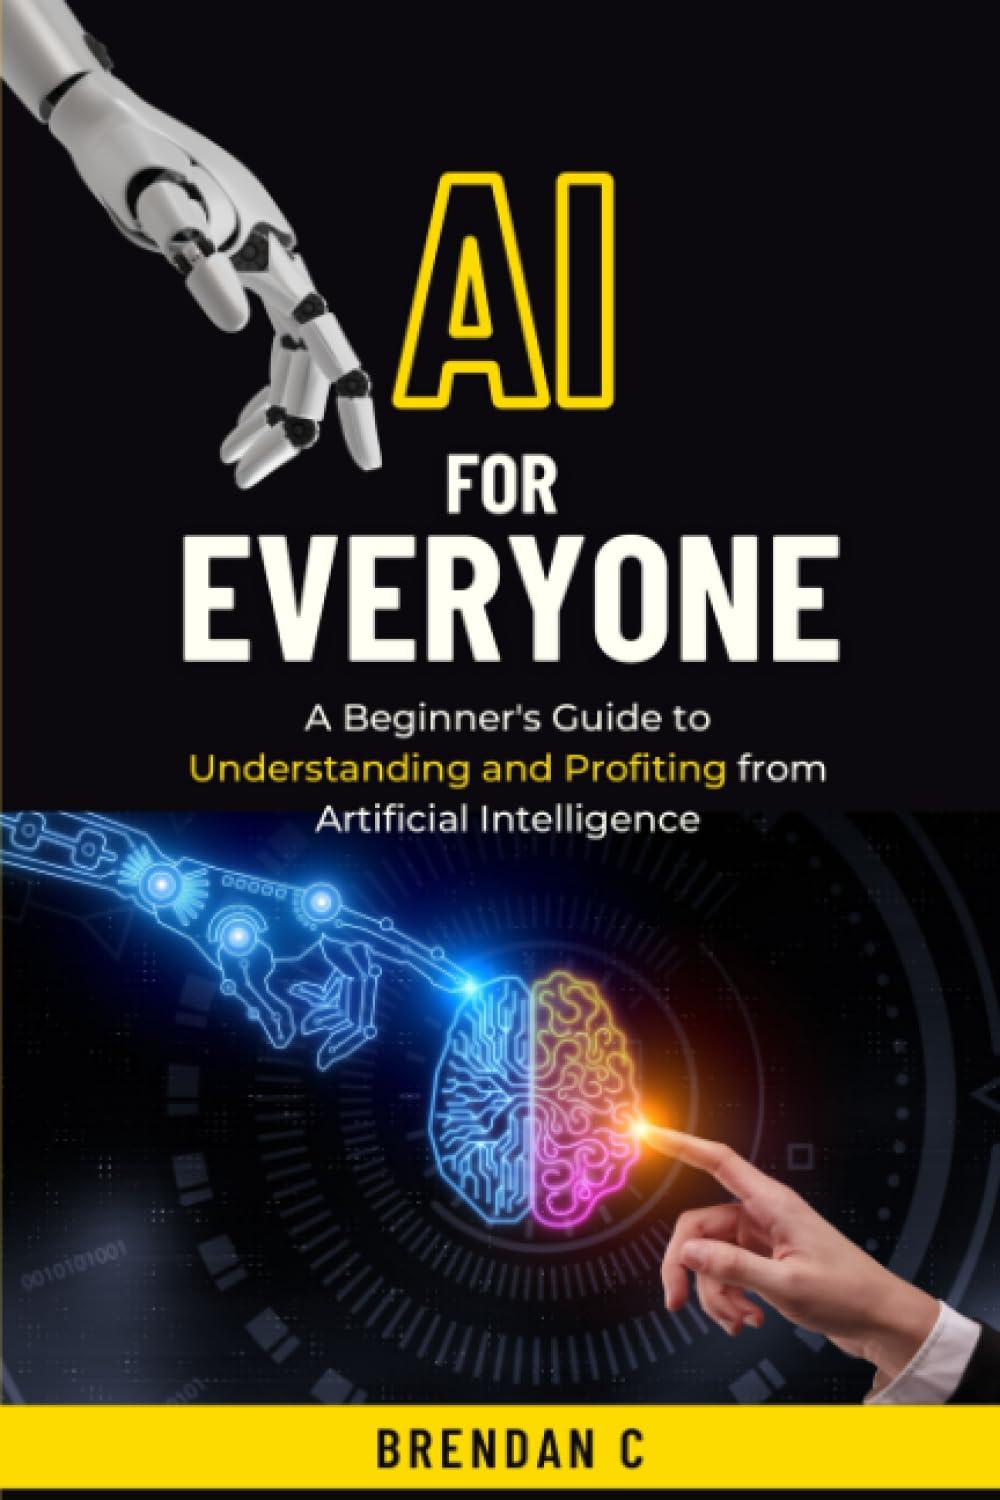 ai for everyone a beginner's guide to understanding and profiting from artificial intelligence 1st edition